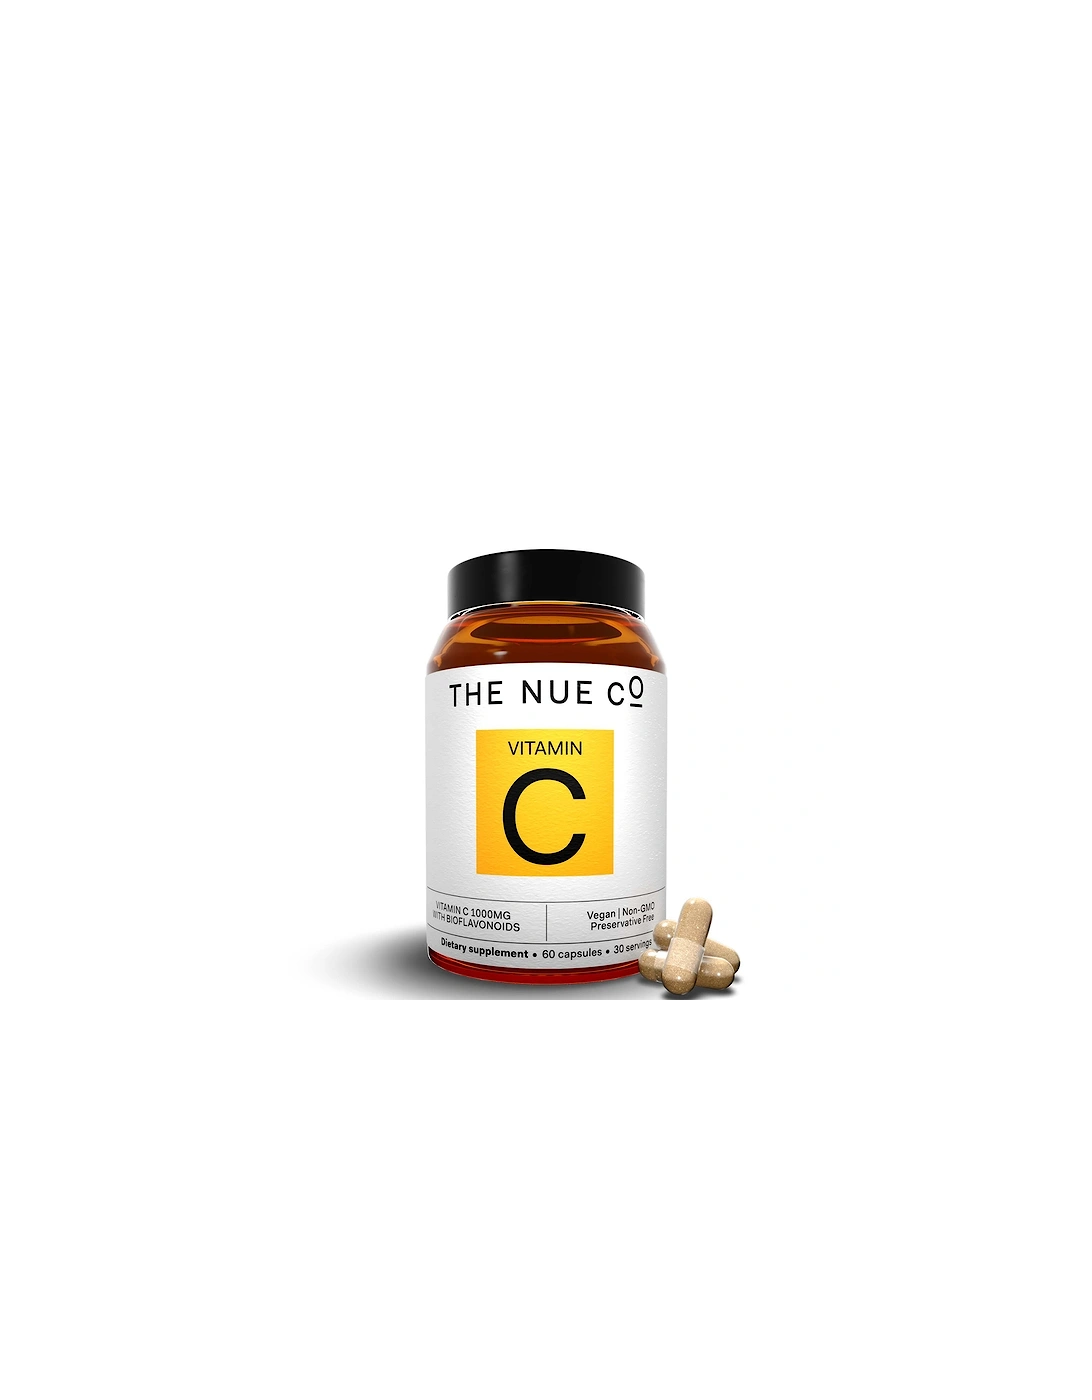 The Nue Co. Vitamin C Supplement To Support Immunity (60 Capsules), 2 of 1